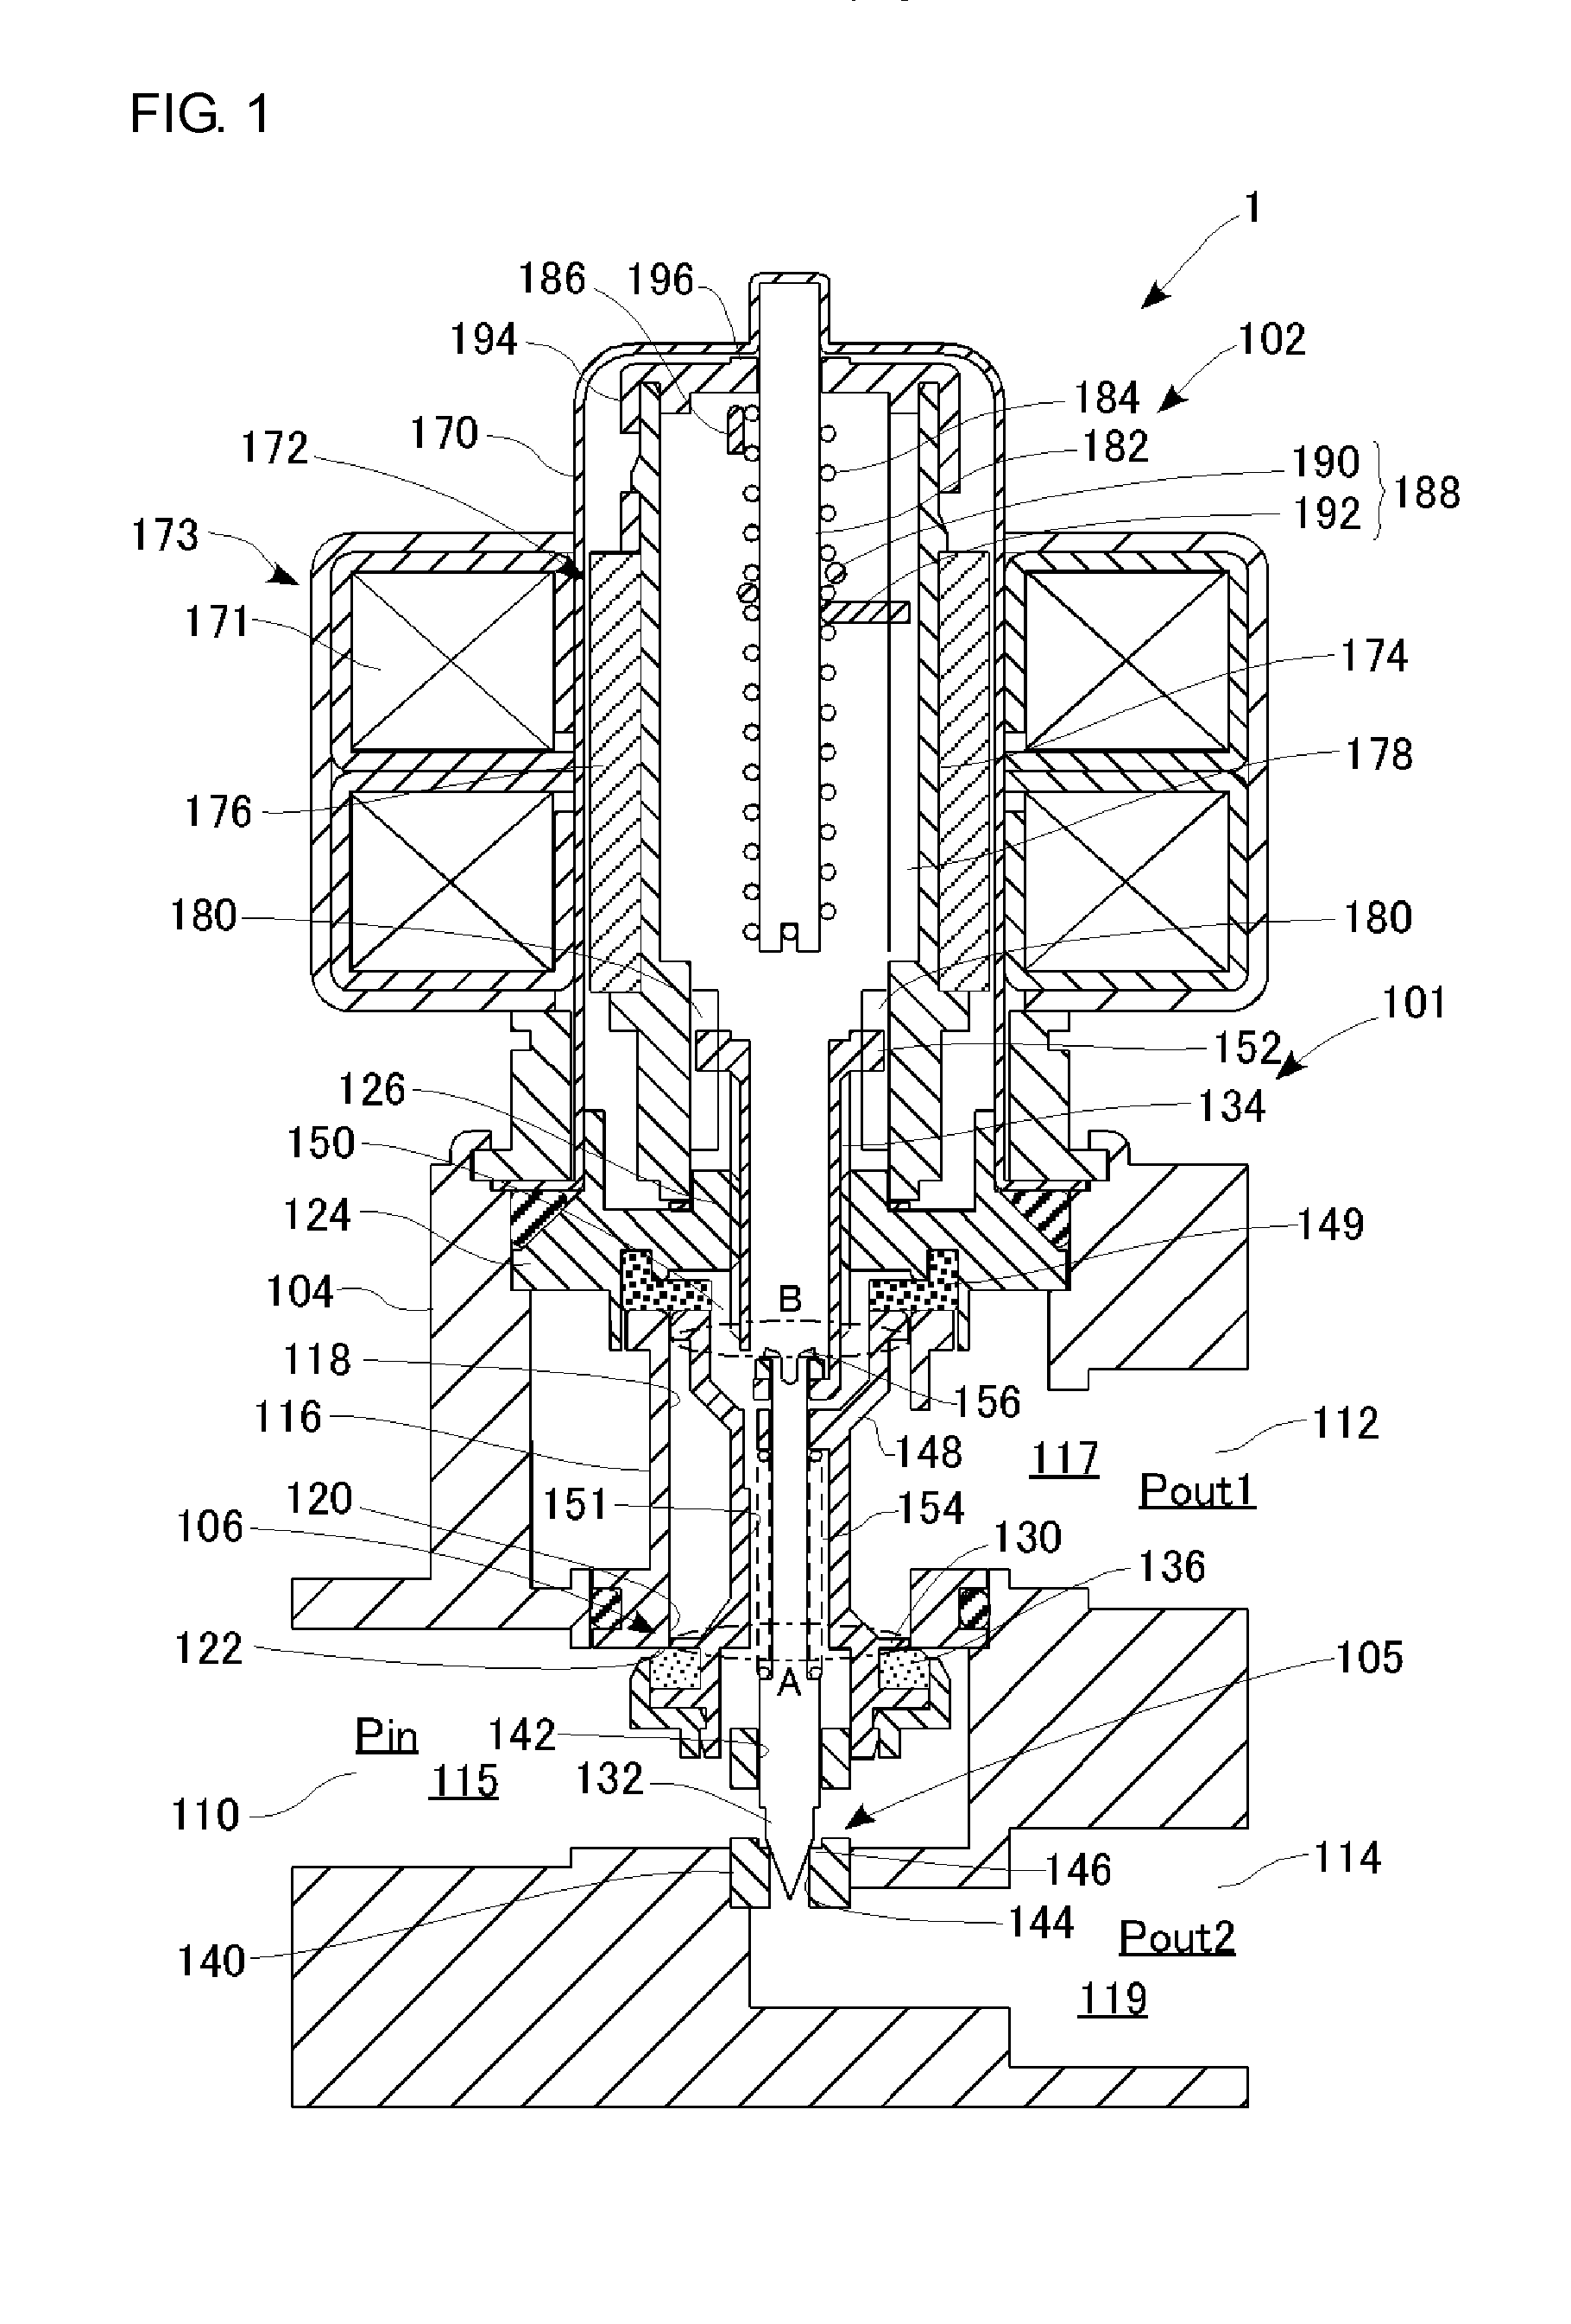 Control valve driven by stepping motor